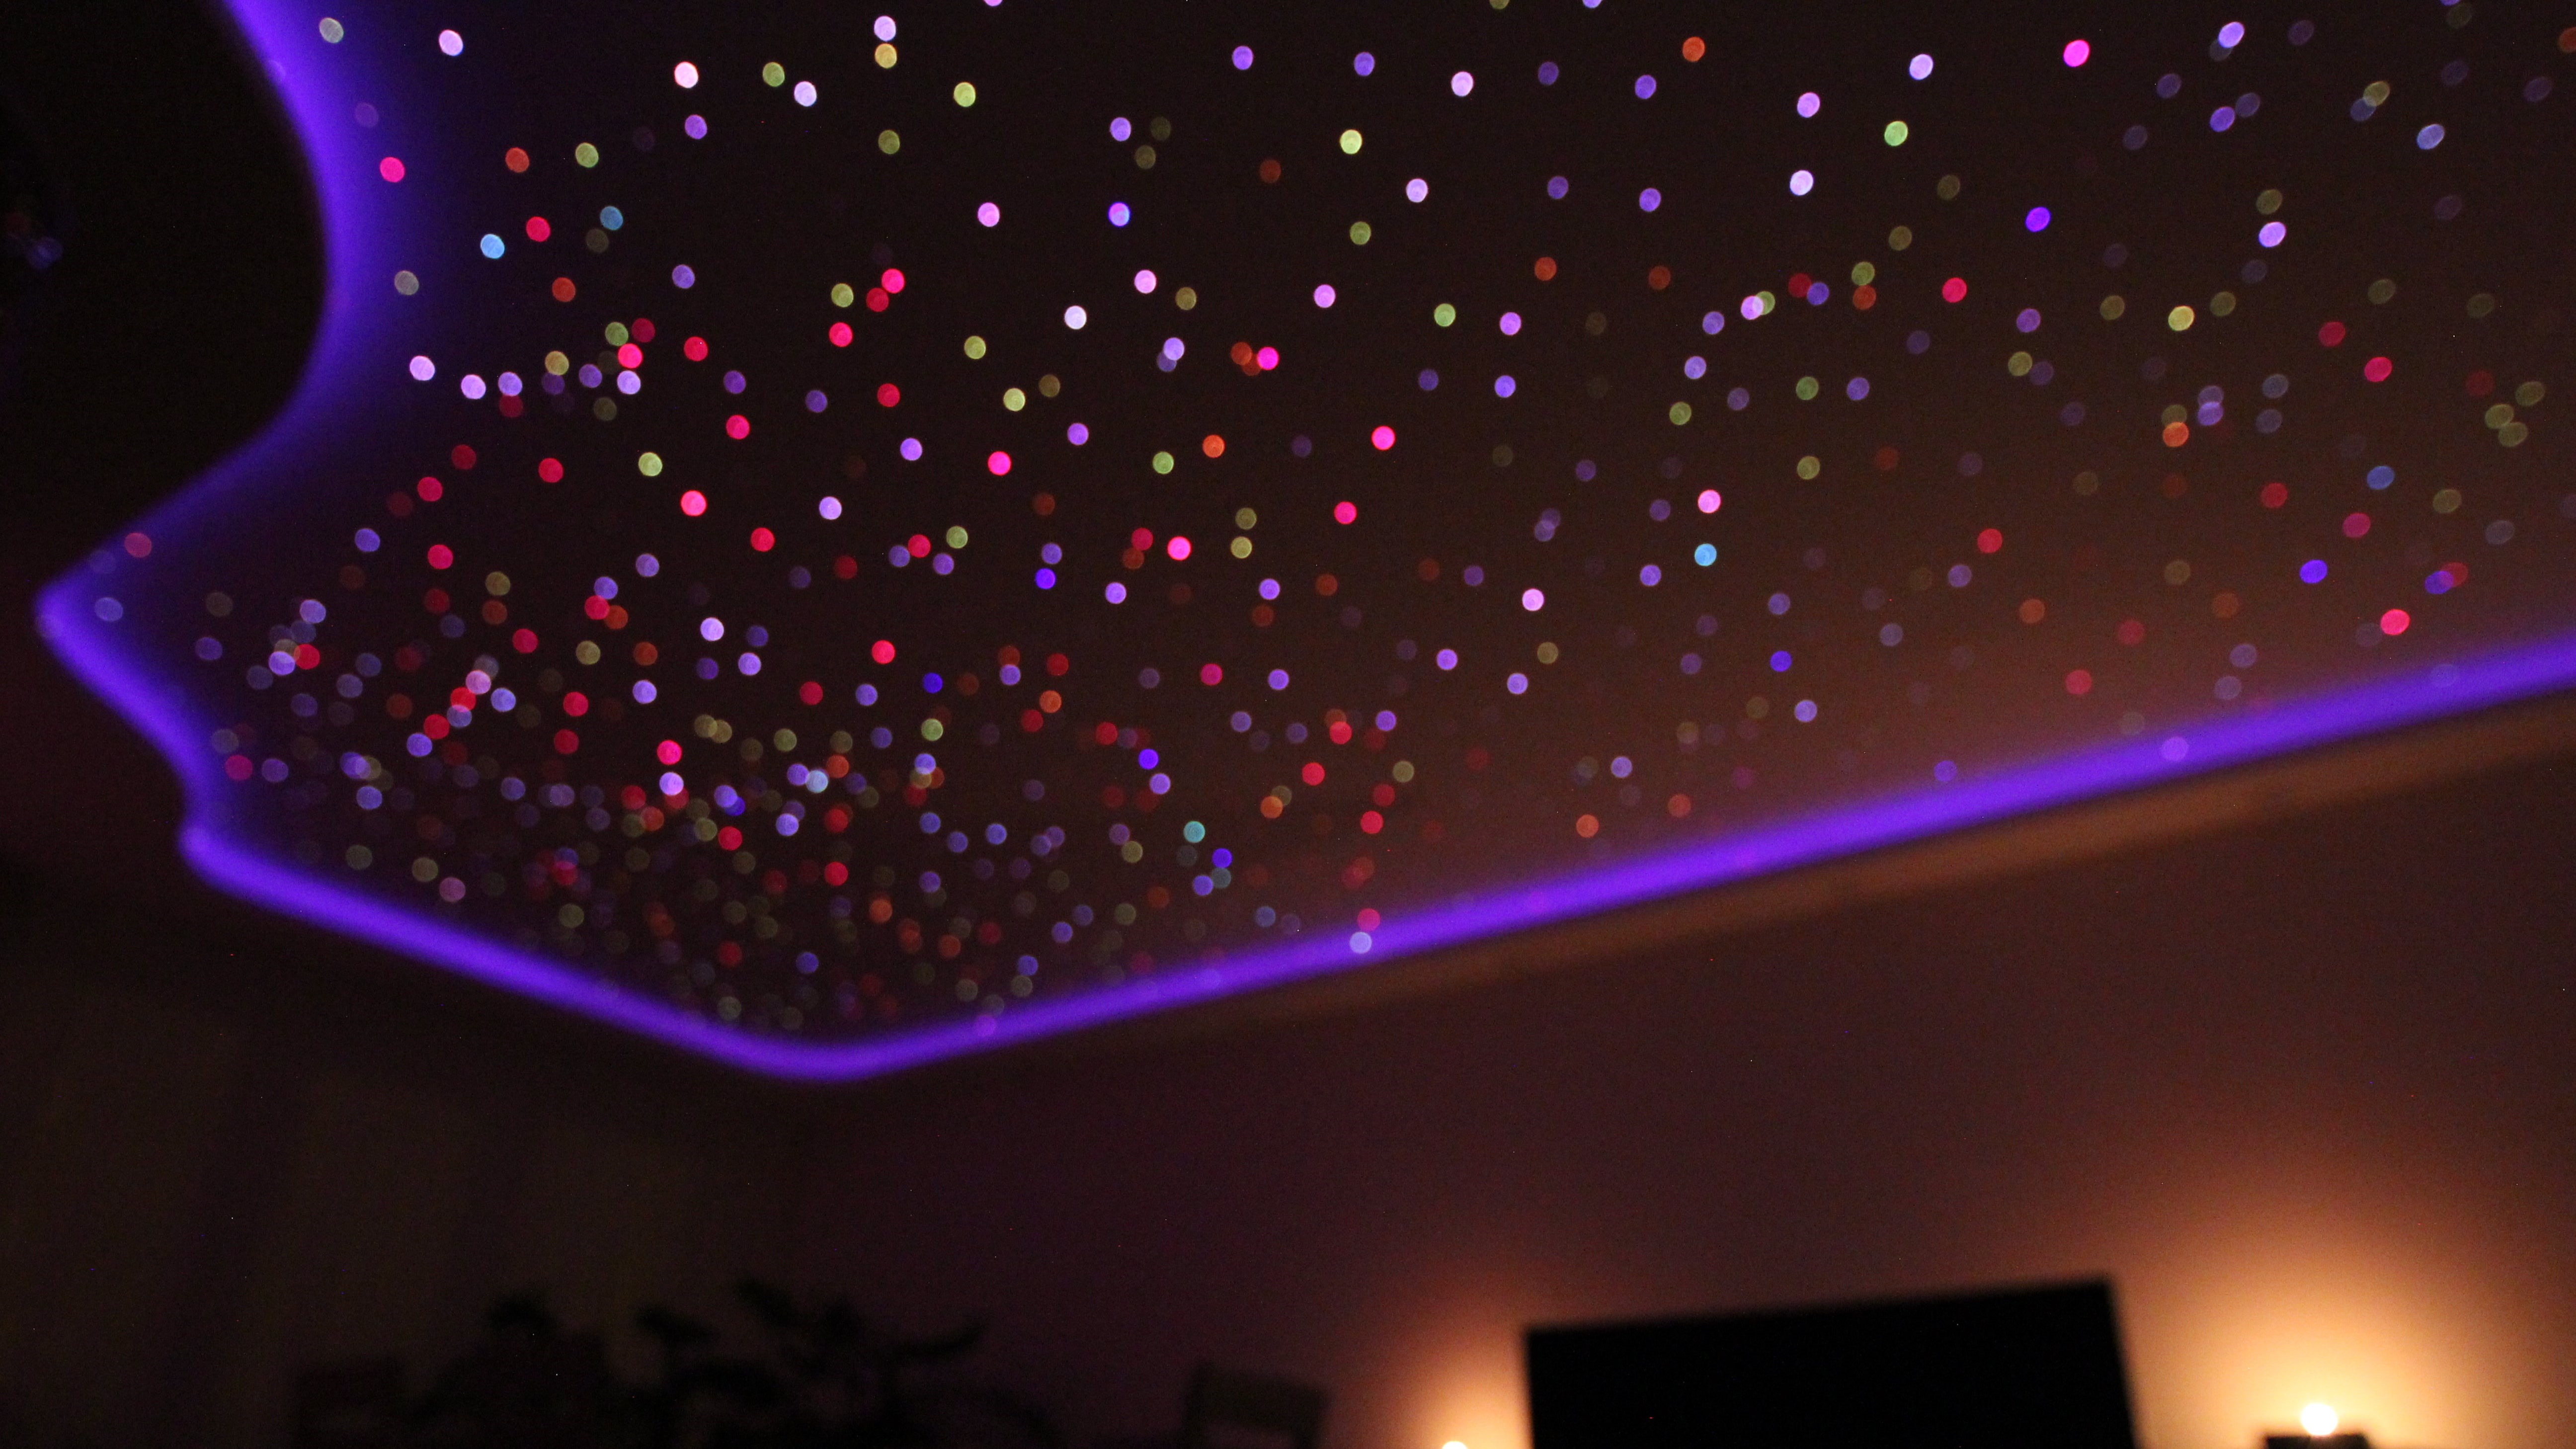 Fiber Optic Ceiling Pumps To The Beat